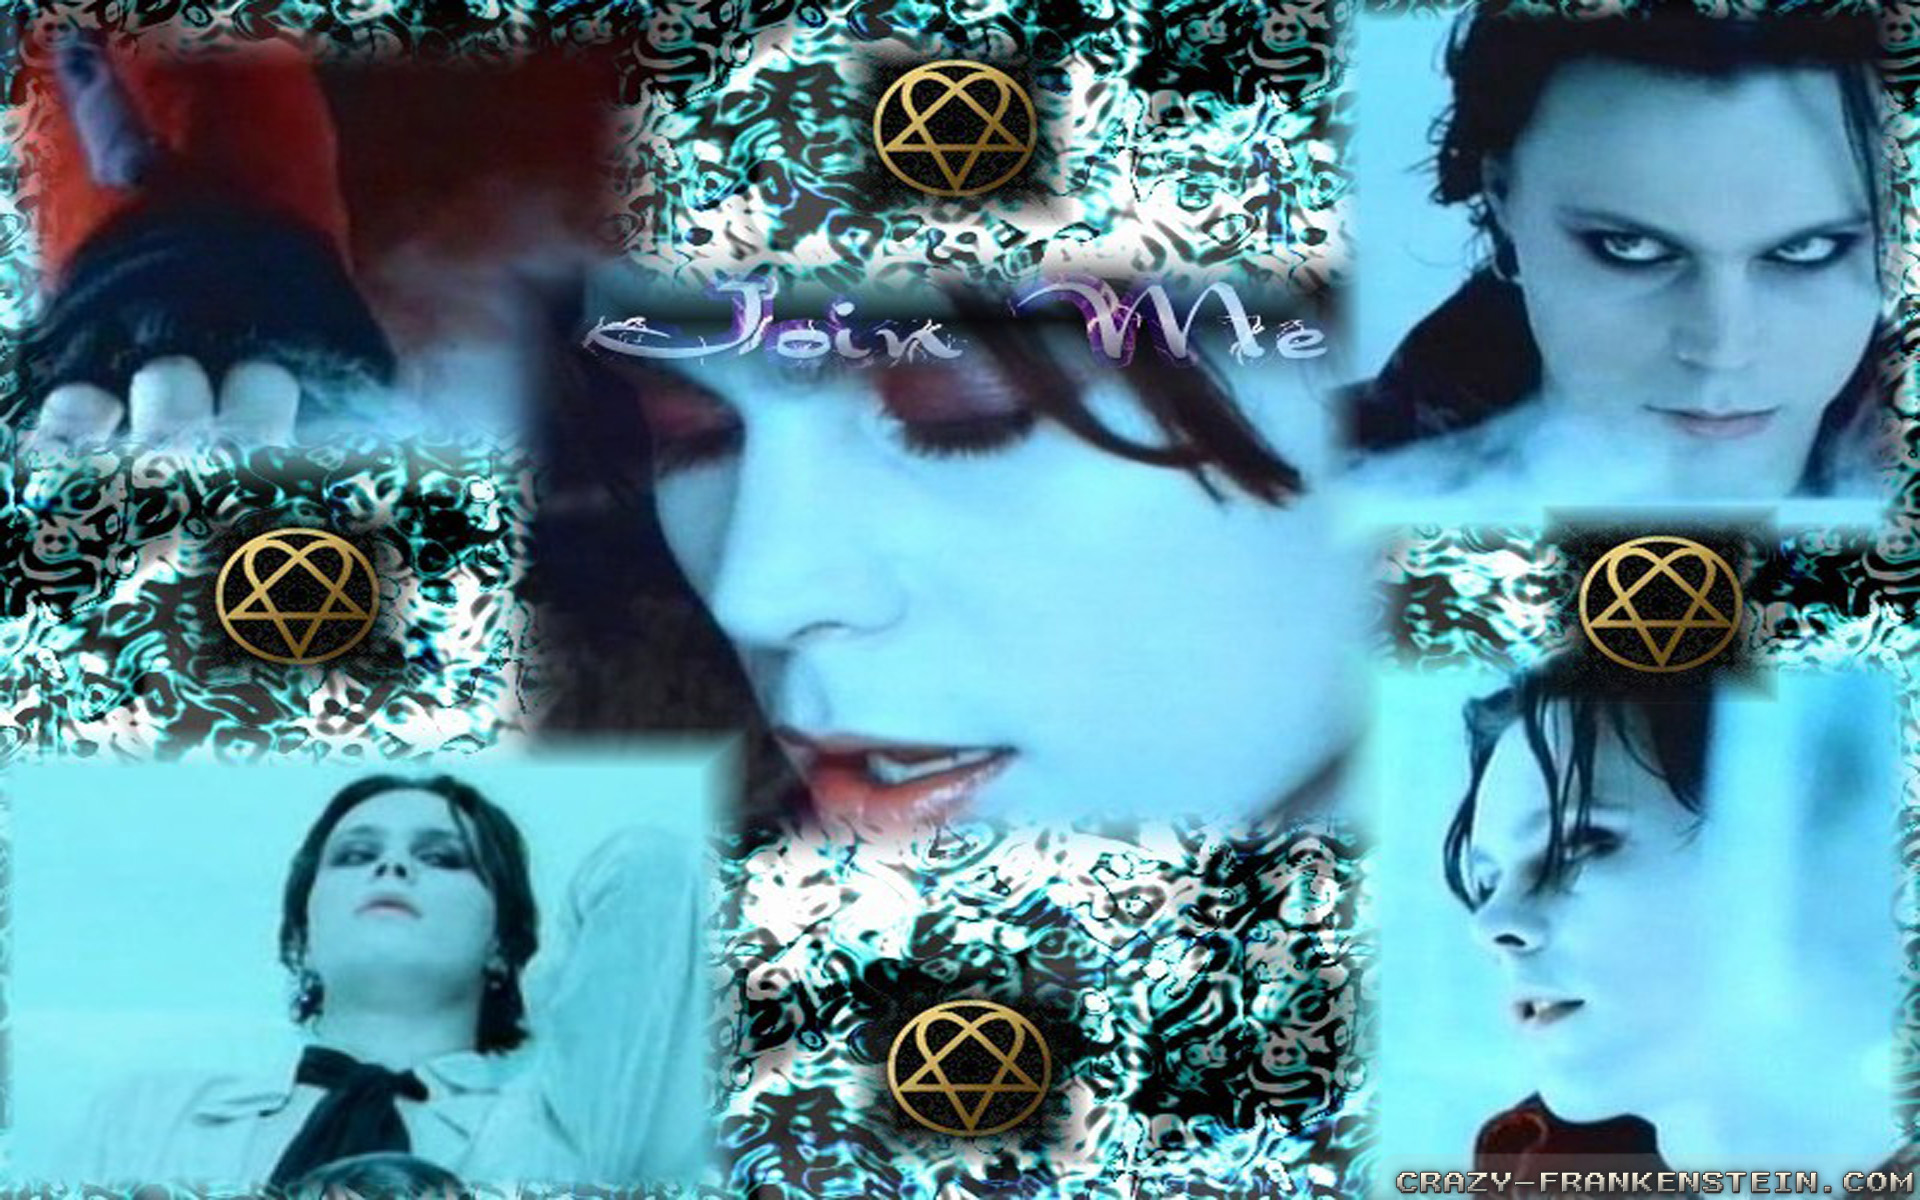 Ville Valo Wallpapers